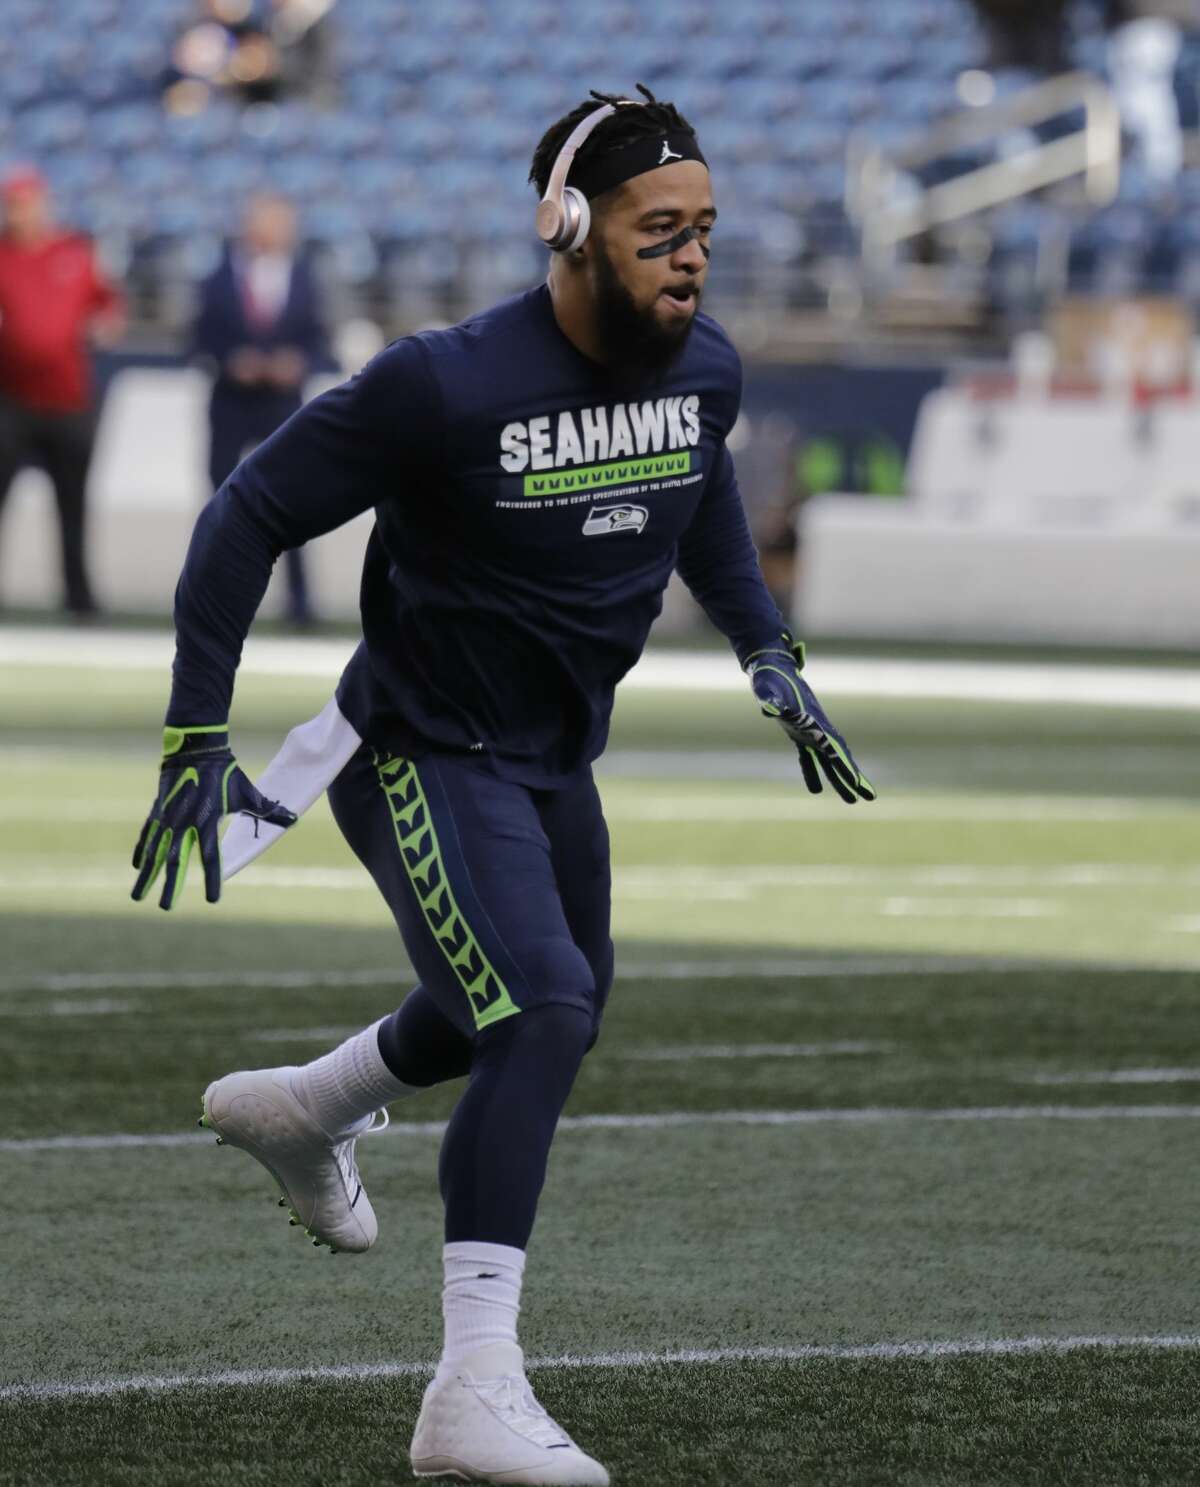 Seattle Seahawks free safety Earl Thomas warms up before an NFL football game against the Arizona Cardinals, Sunday, Dec. 31, 2017, in Seattle. (AP Photo/Elaine Thompson)